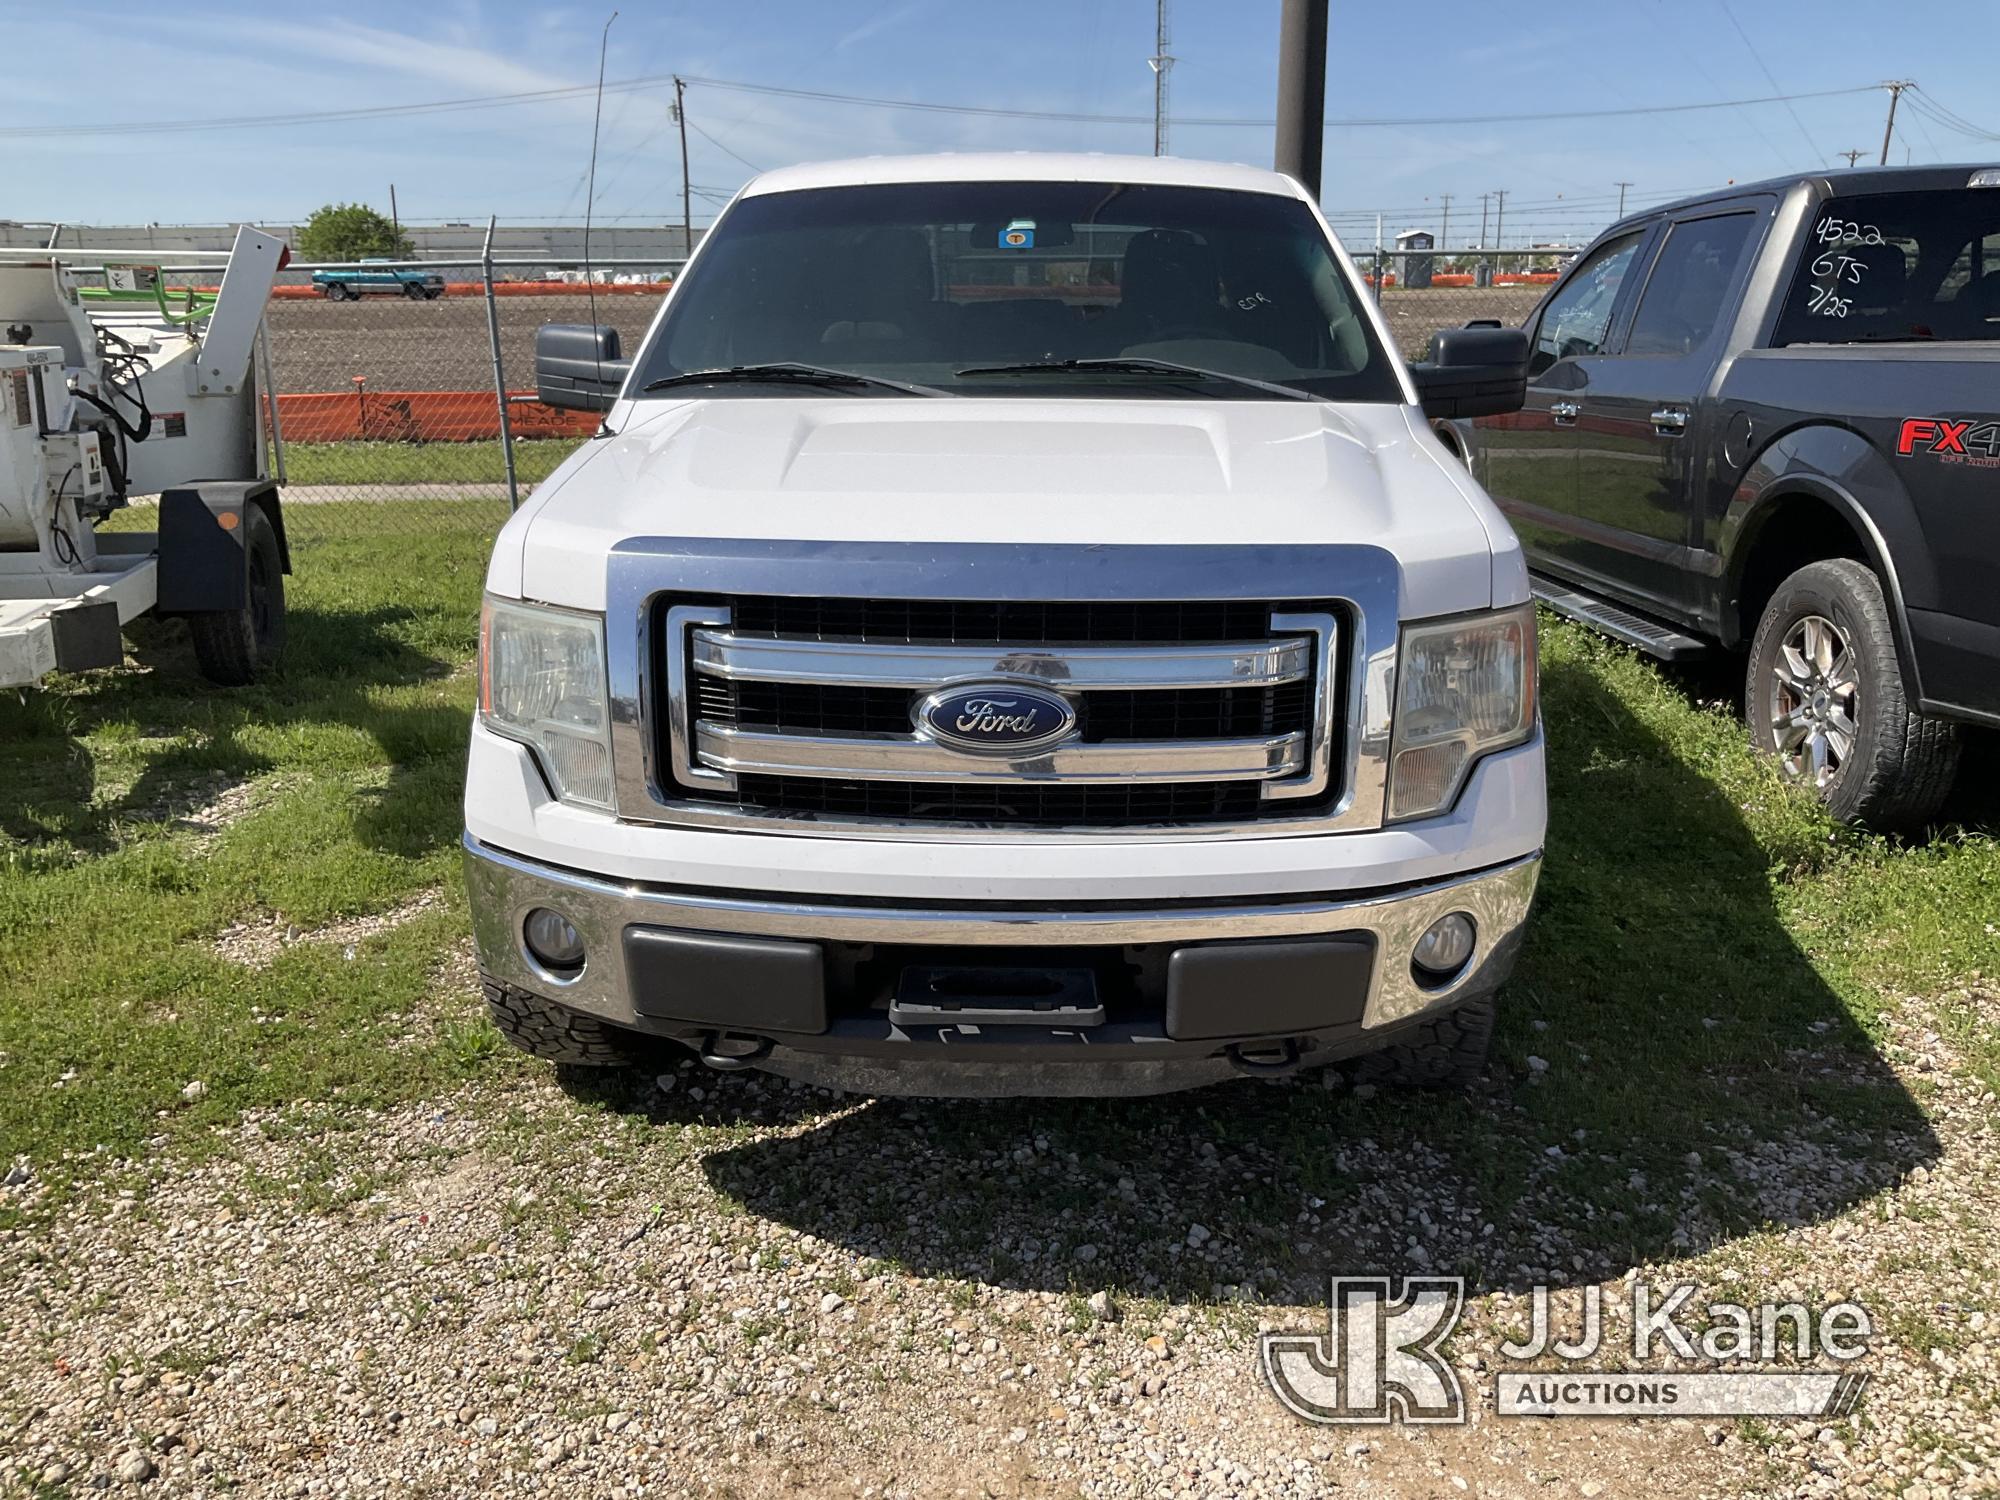 (Waxahachie, TX) 2014 Ford F150 4x4 Crew-Cab Pickup Truck Not Running, Condition Unknown